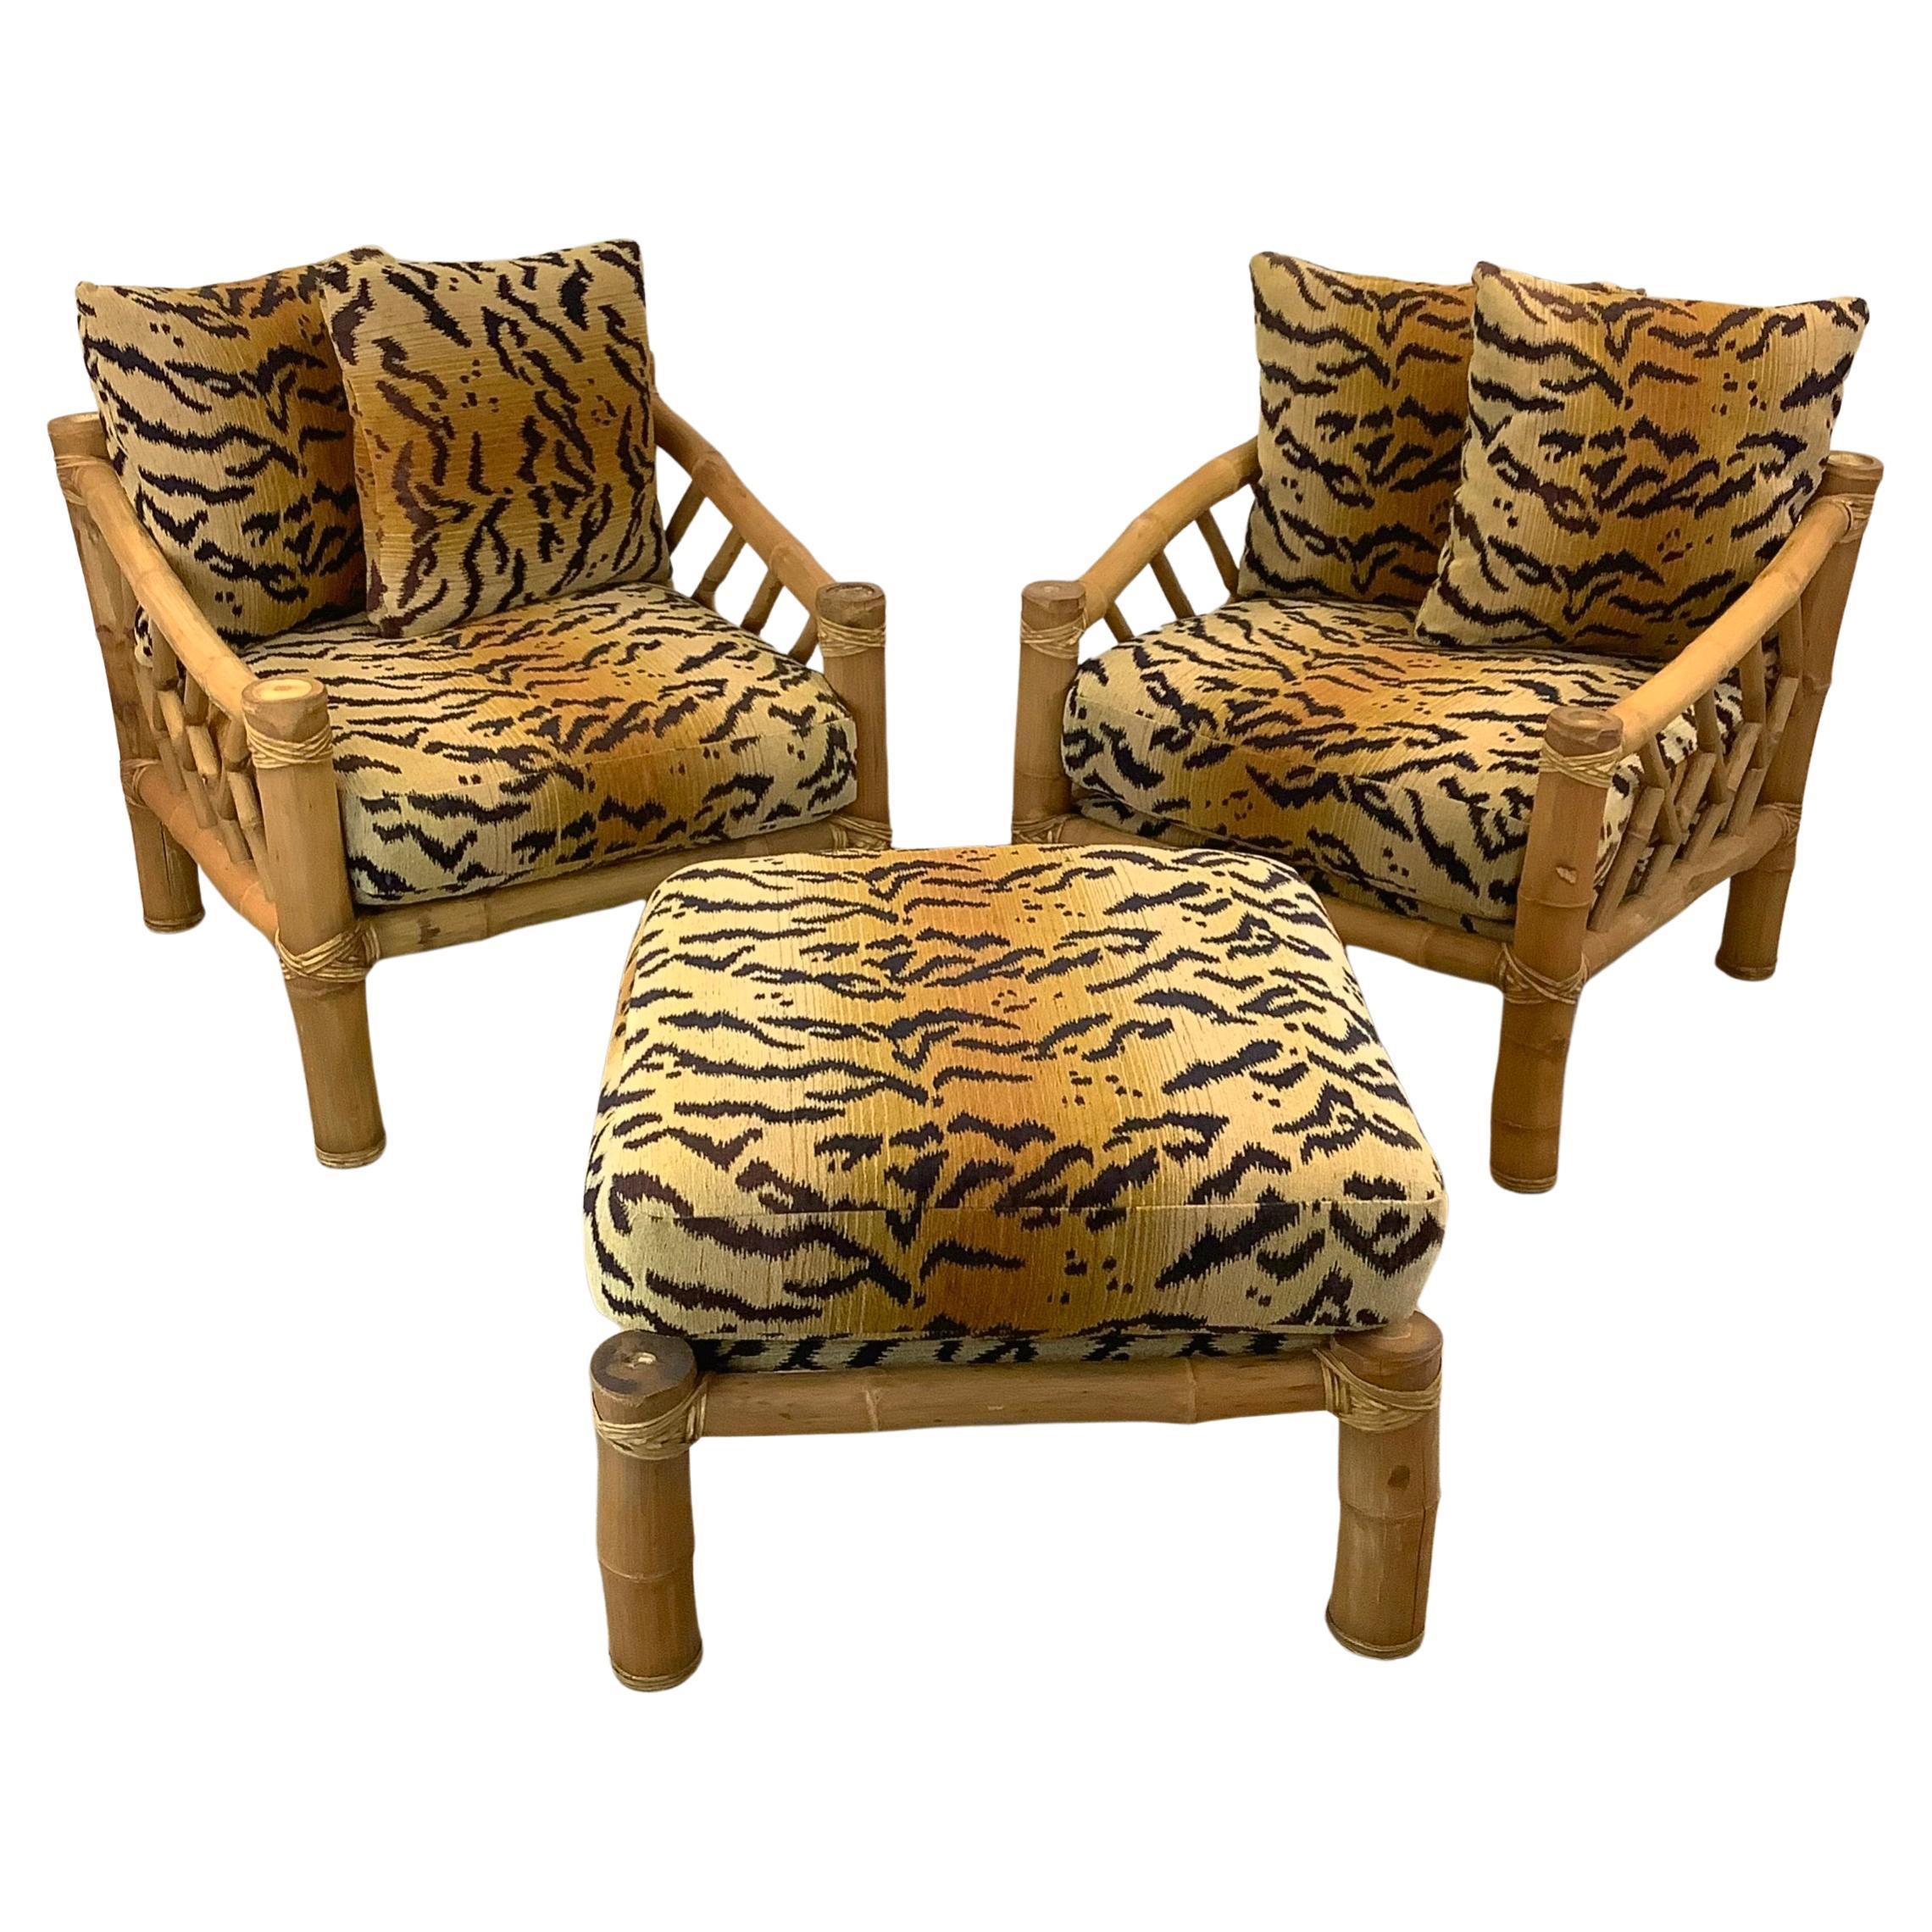 Pair Vintage Bamboo Armchairs & Ottoman in Tiger Print